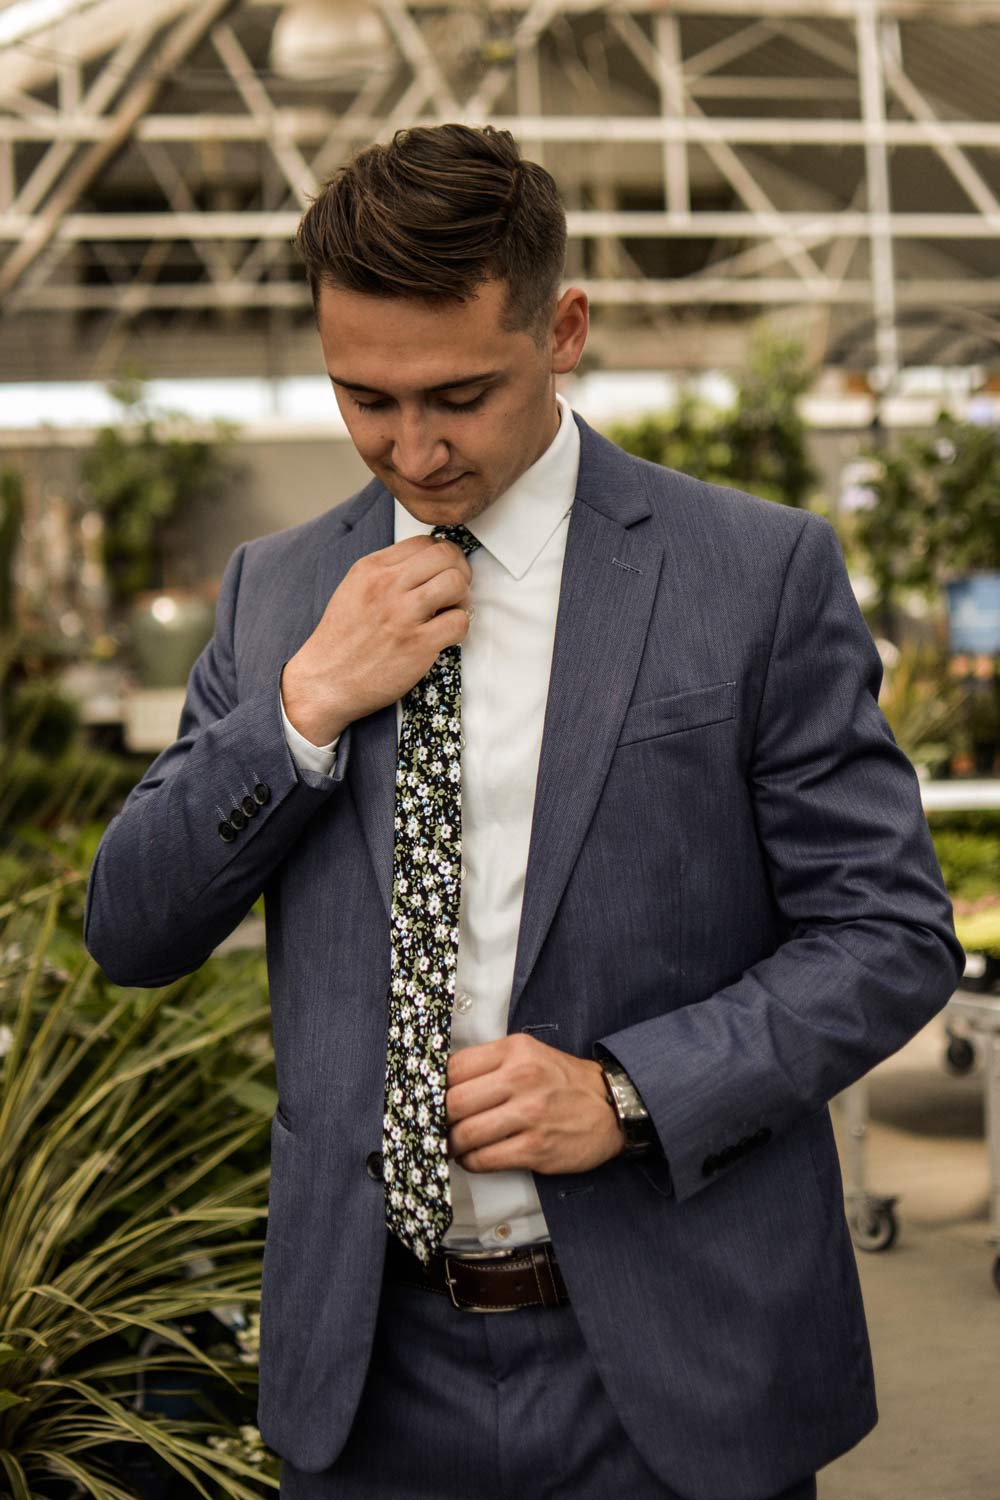 Morning Glory tie worn with white shirt, brown belt and dark navy blue suit.